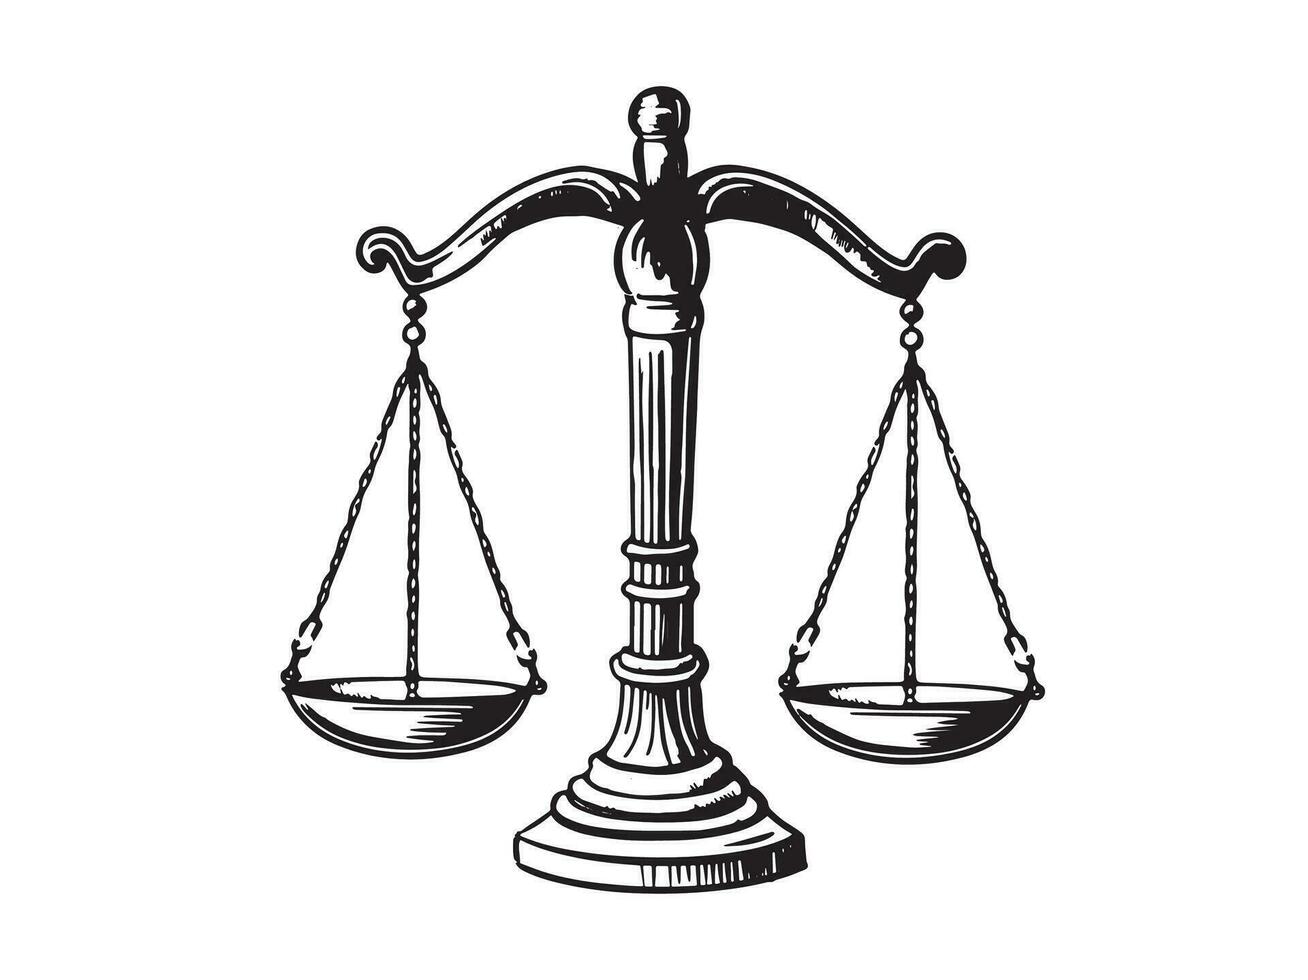 https://static.vecteezy.com/system/resources/previews/025/797/689/non_2x/scales-for-weighing-libra-justice-hand-drawn-hand-drawn-isolated-on-white-background-vector.jpg